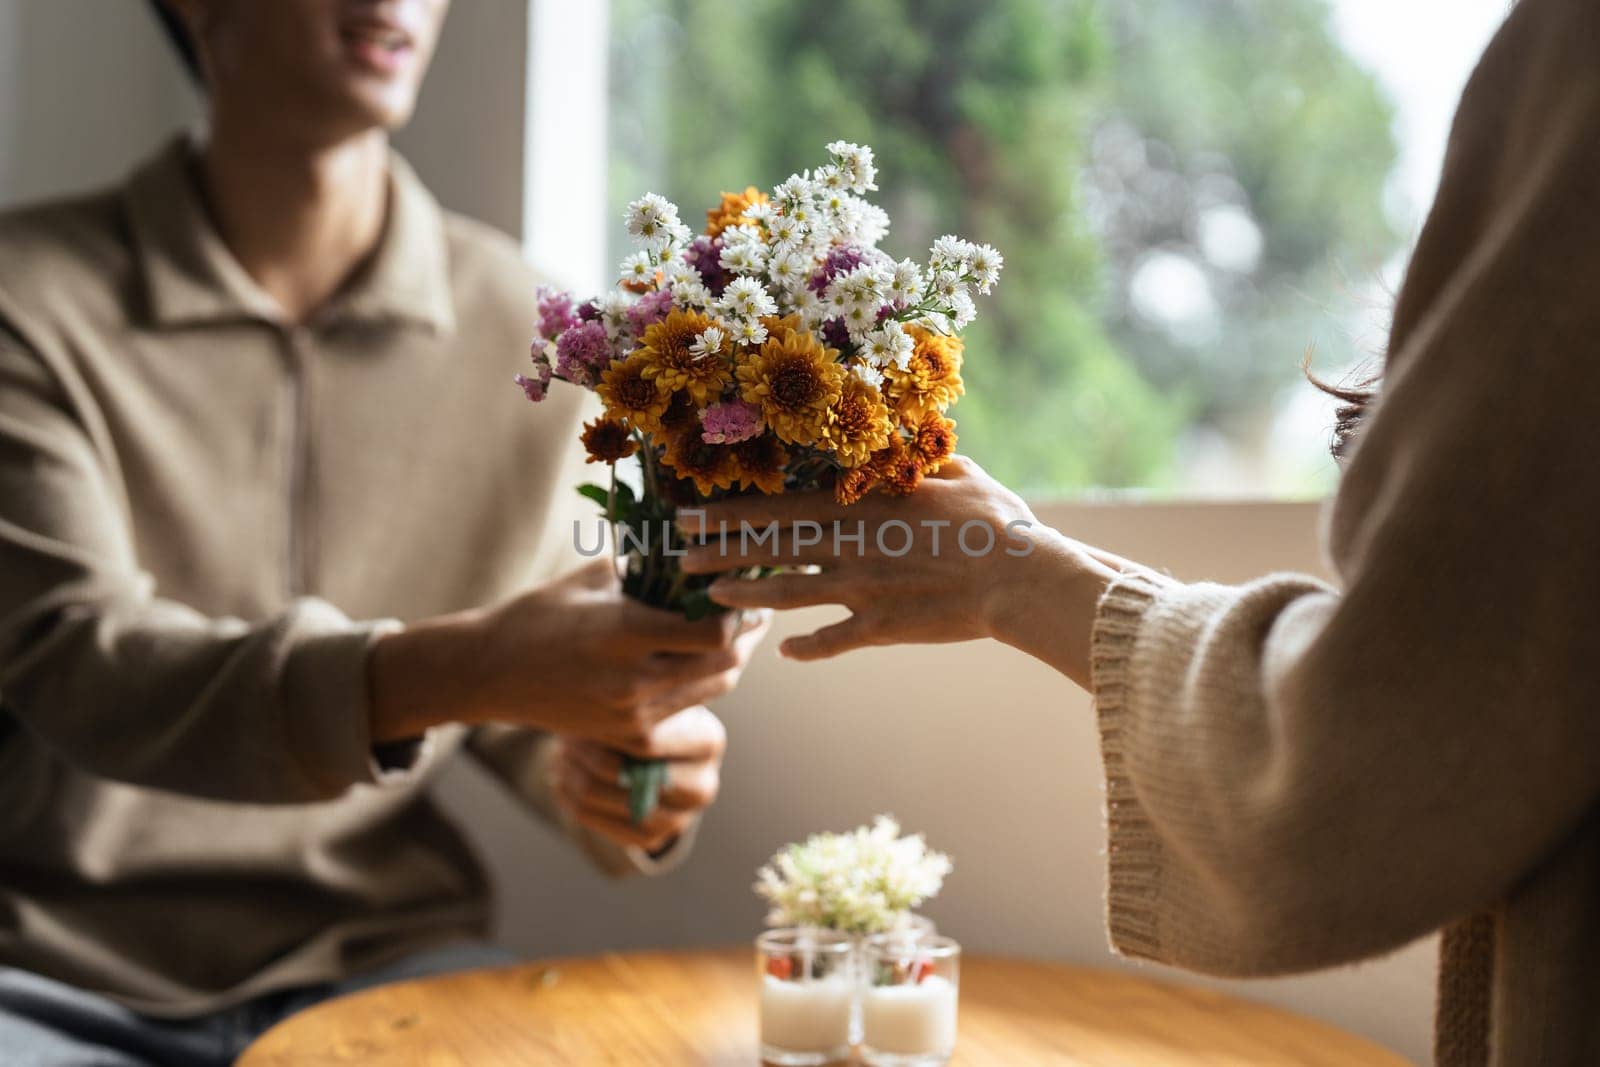 Young couple Hug and giving flower on Valentine's Day. Romantic day together. Valentine's Day concept.